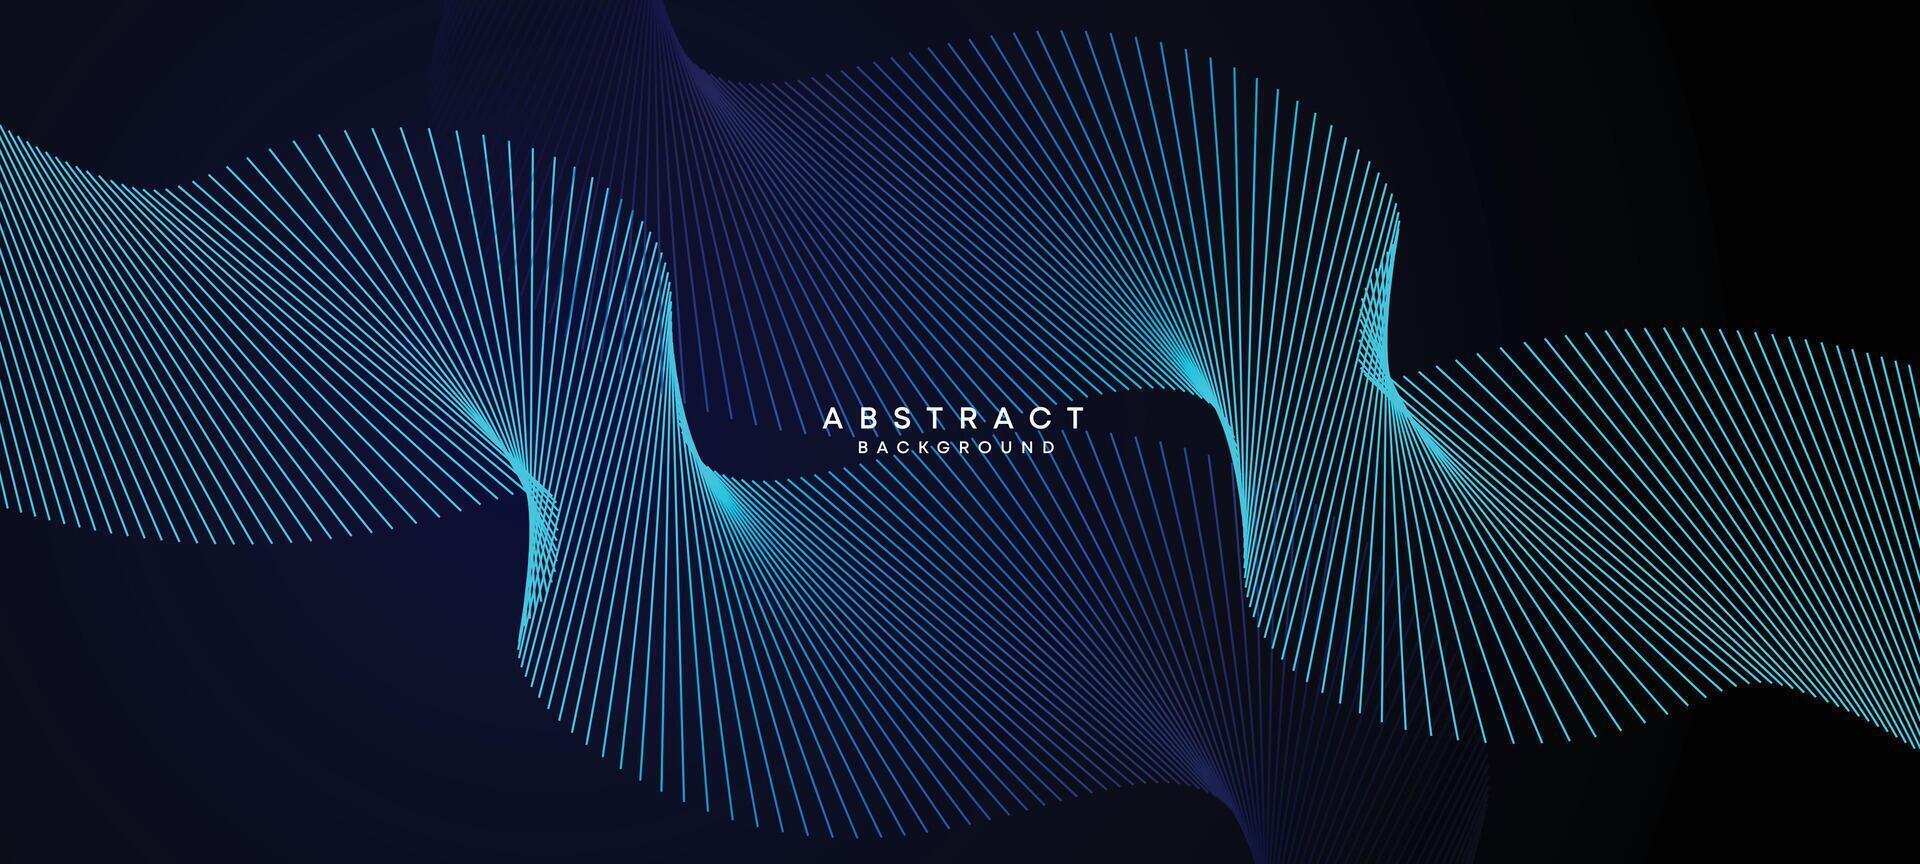 Abstract Dark Blue Waving circles lines Technology Background. Modern Navy Blue gradient with glowing lines shiny geometric shape and diagonal, for brochure, cover, poster, banner, website, header vector